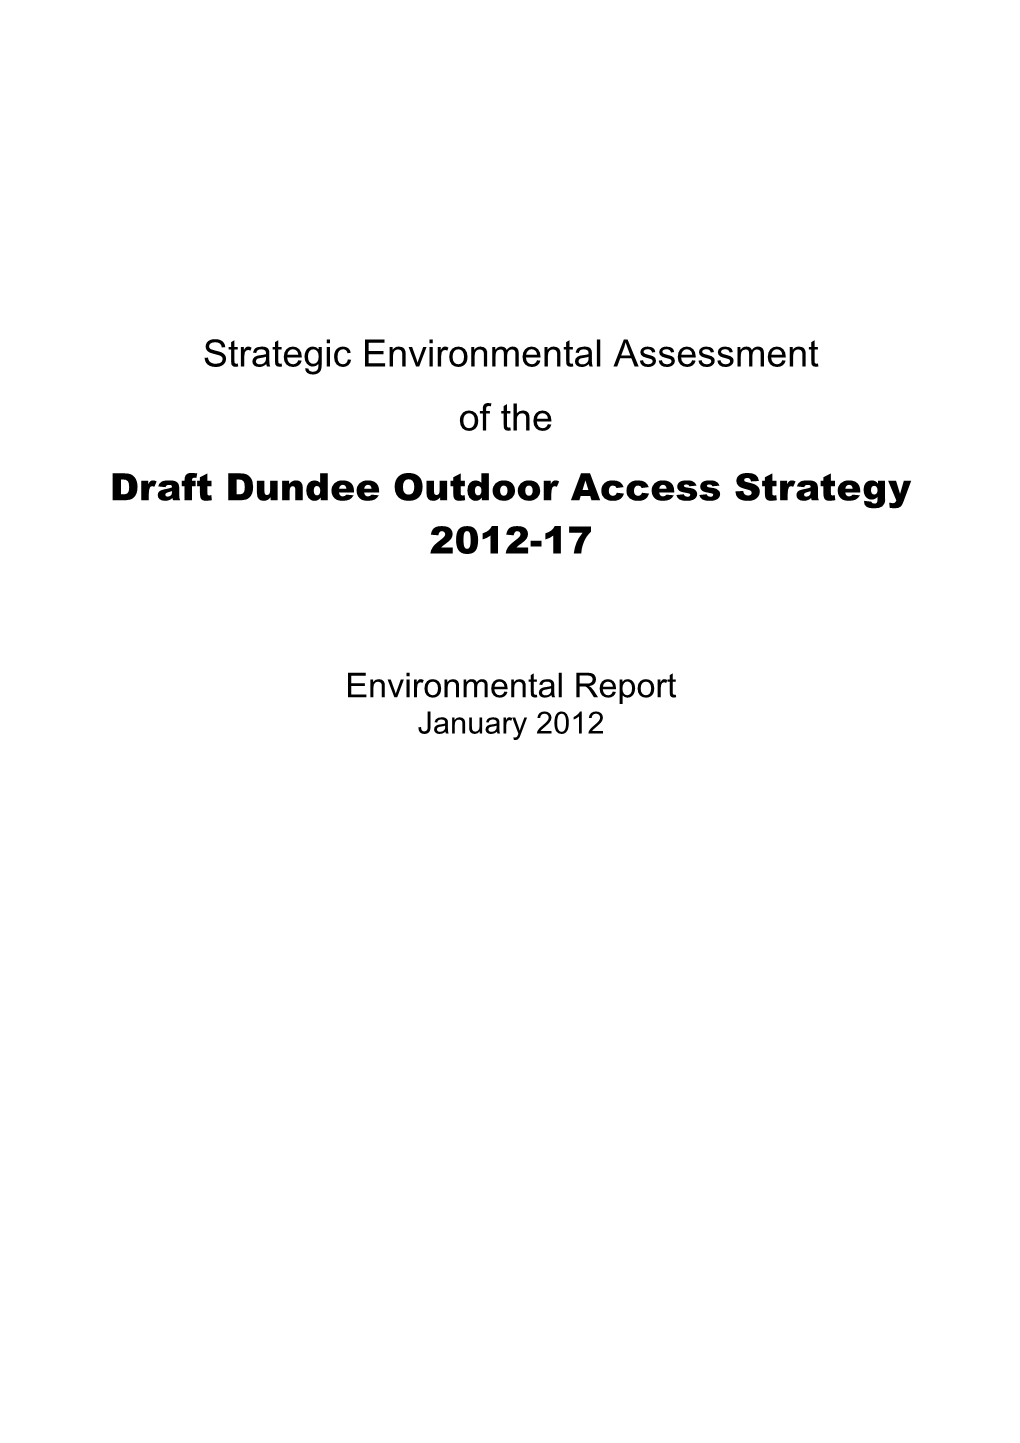 Draft Dundee Outdoor Access Strategy 2012-17